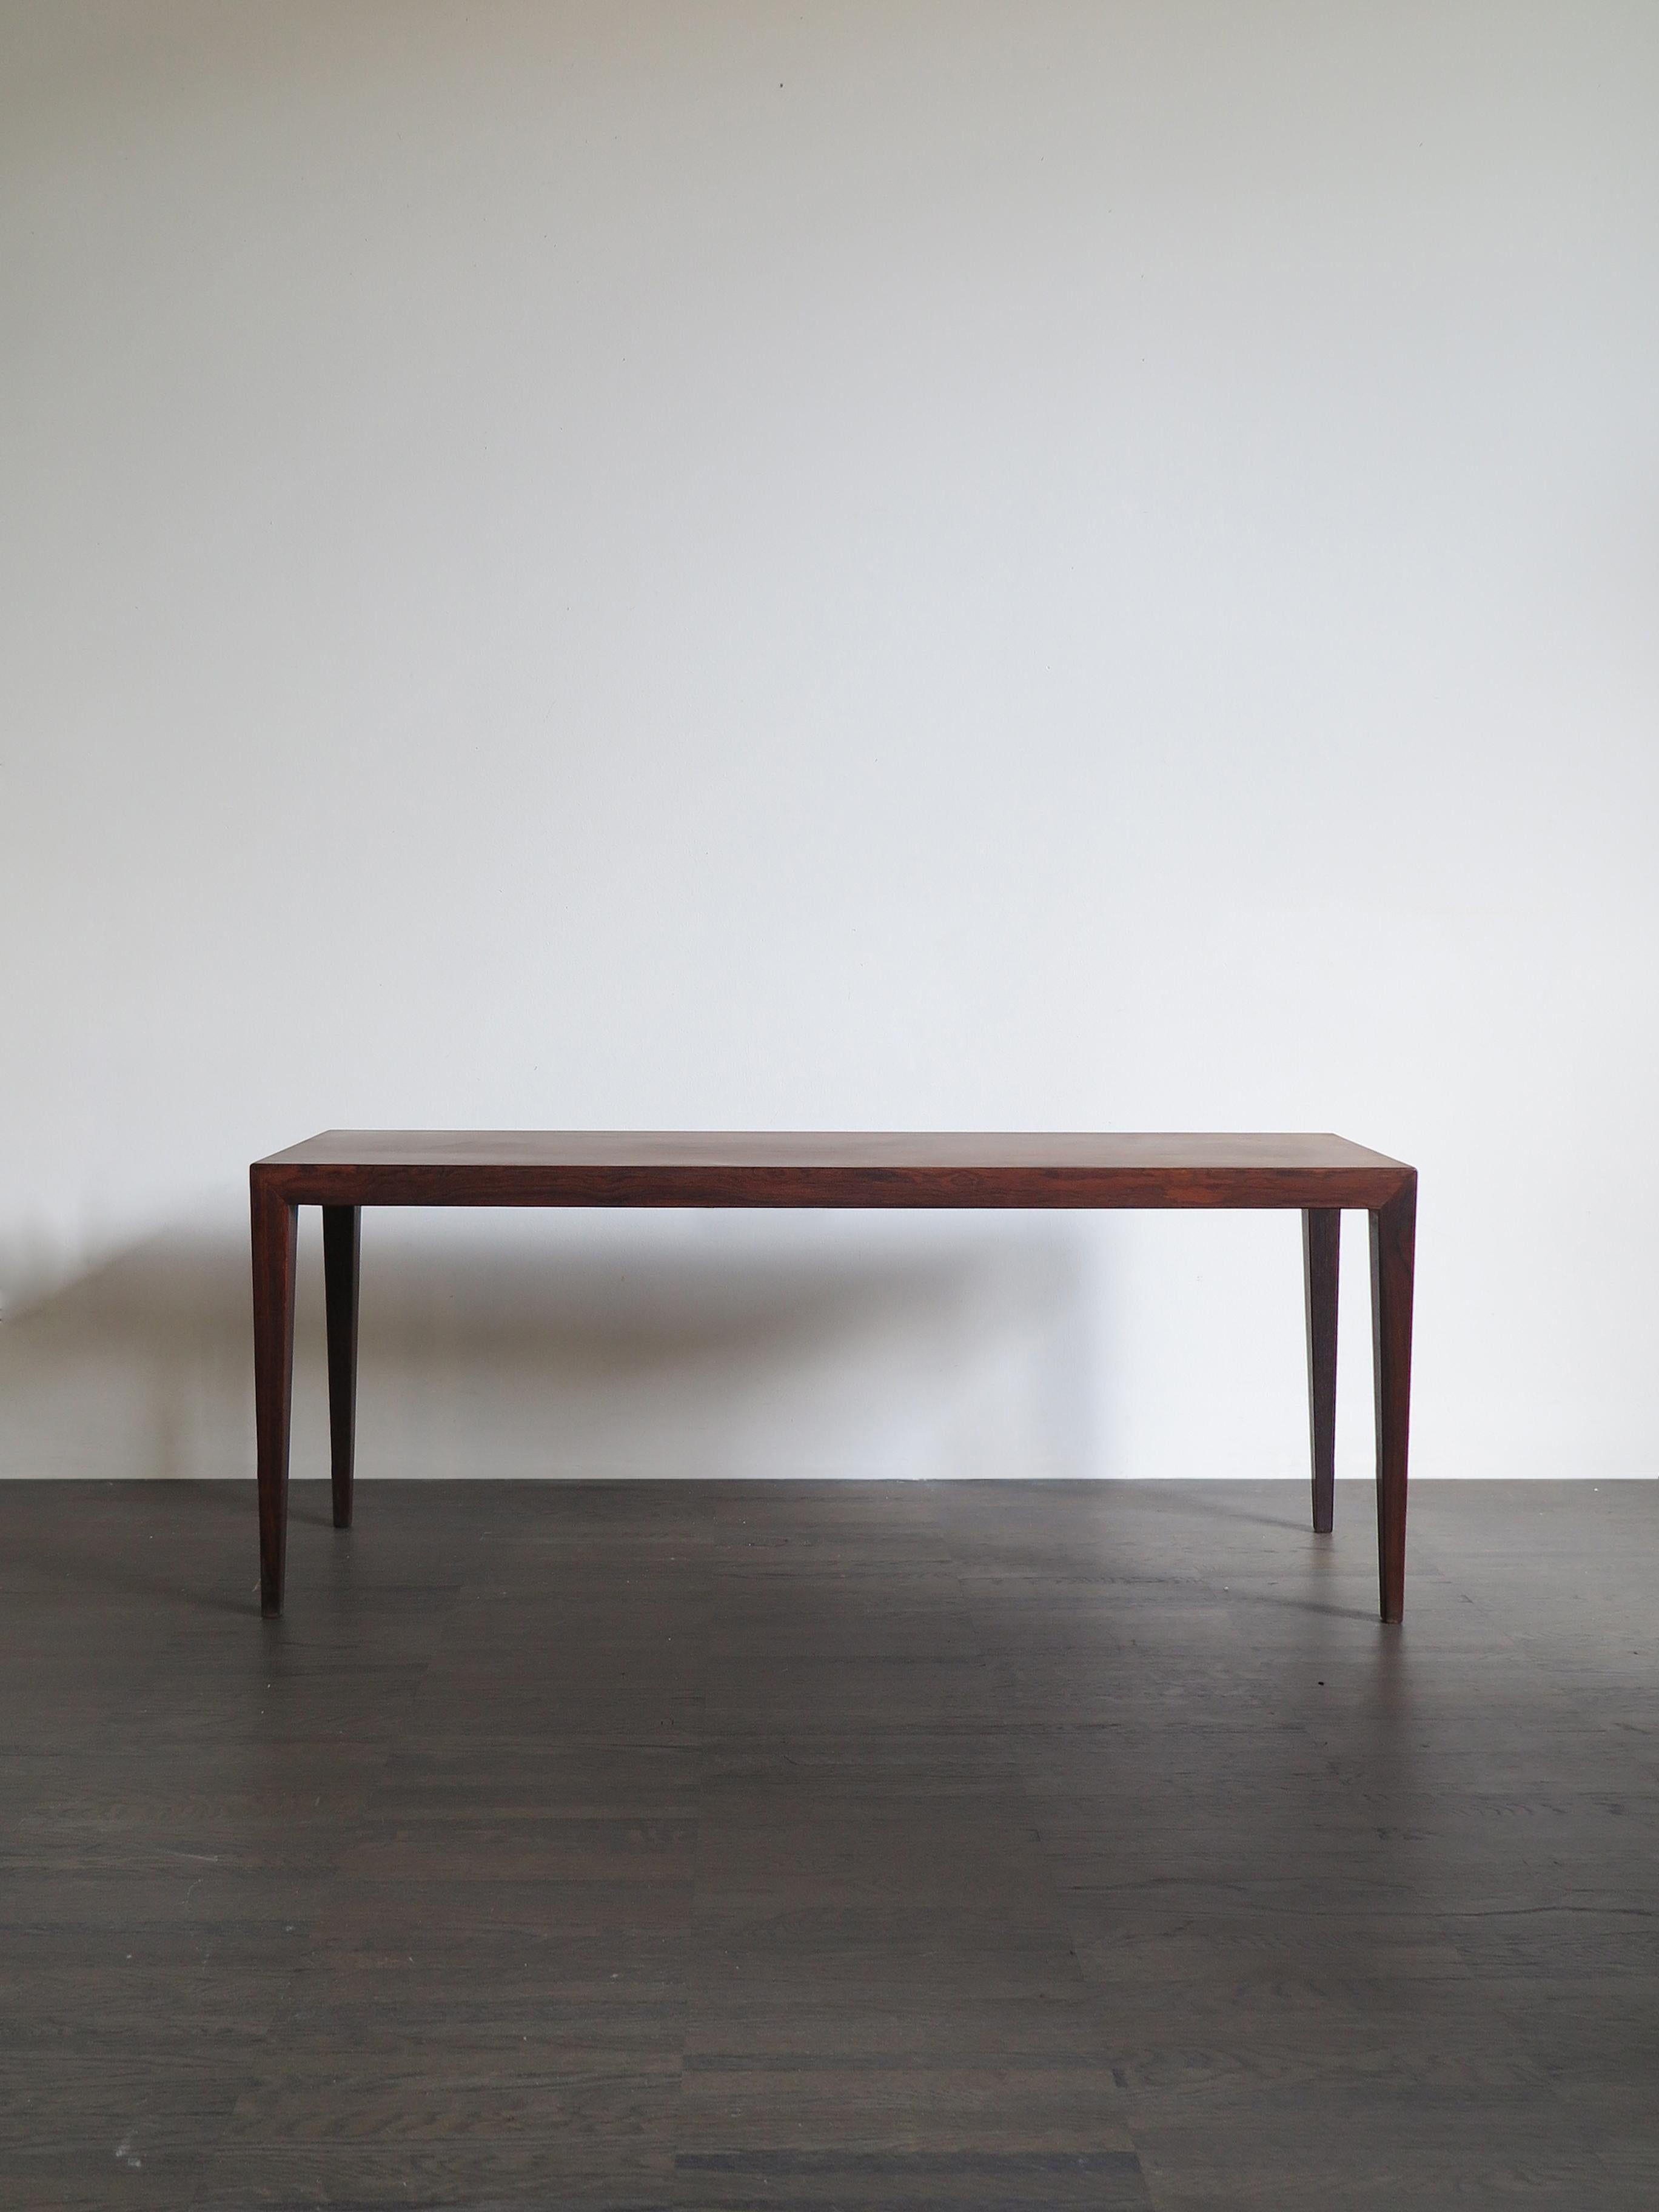 Scandinavian dark wood coffee table console designed by Danish designer Severin Hansen and produced by Haslev Møbelsnedkeri, 1950s

Please note that the table is original of the period and this shows normal signs of age and use.